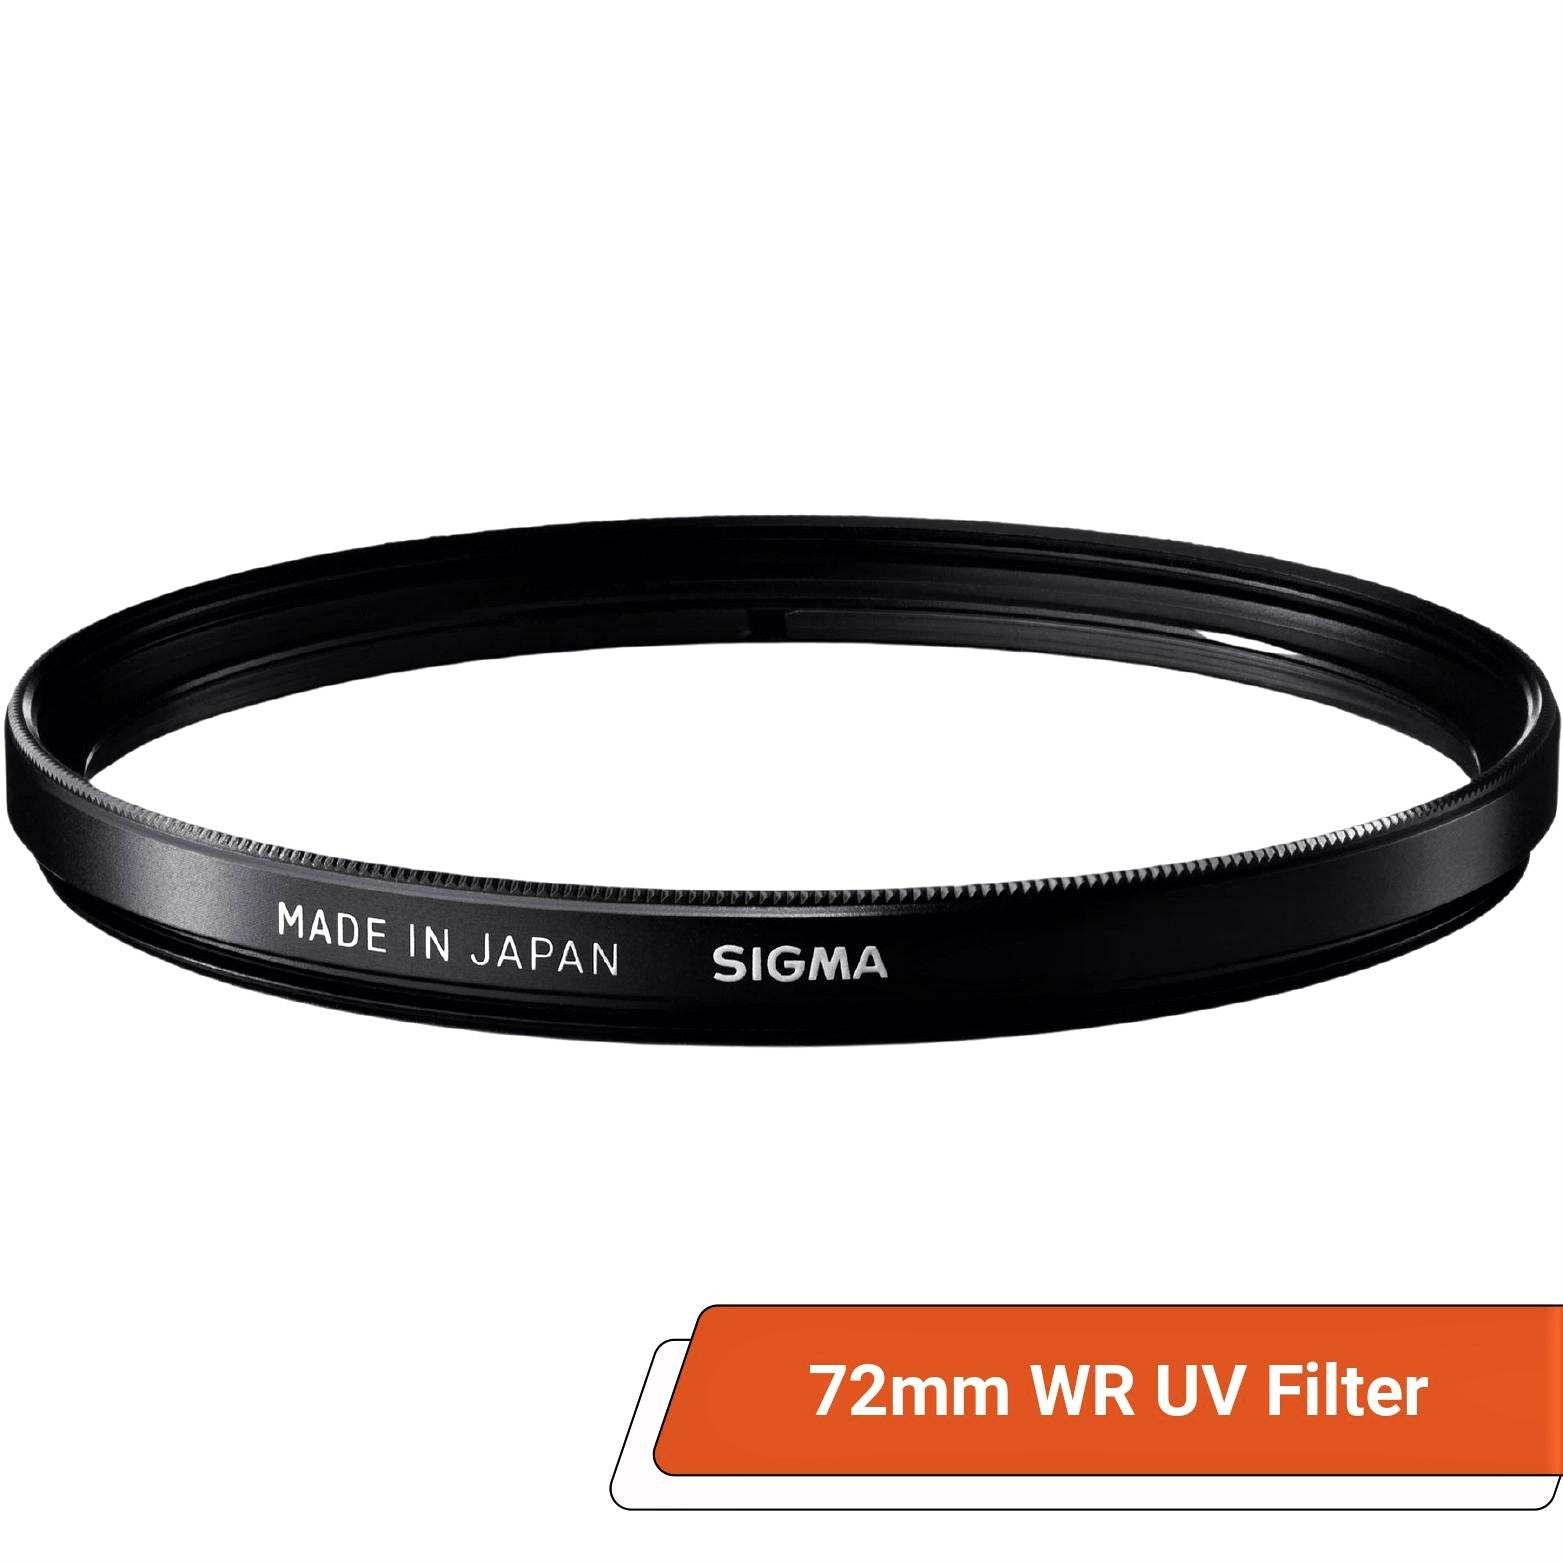 Sigma 72mm WR (Water Repellent) UV Filter